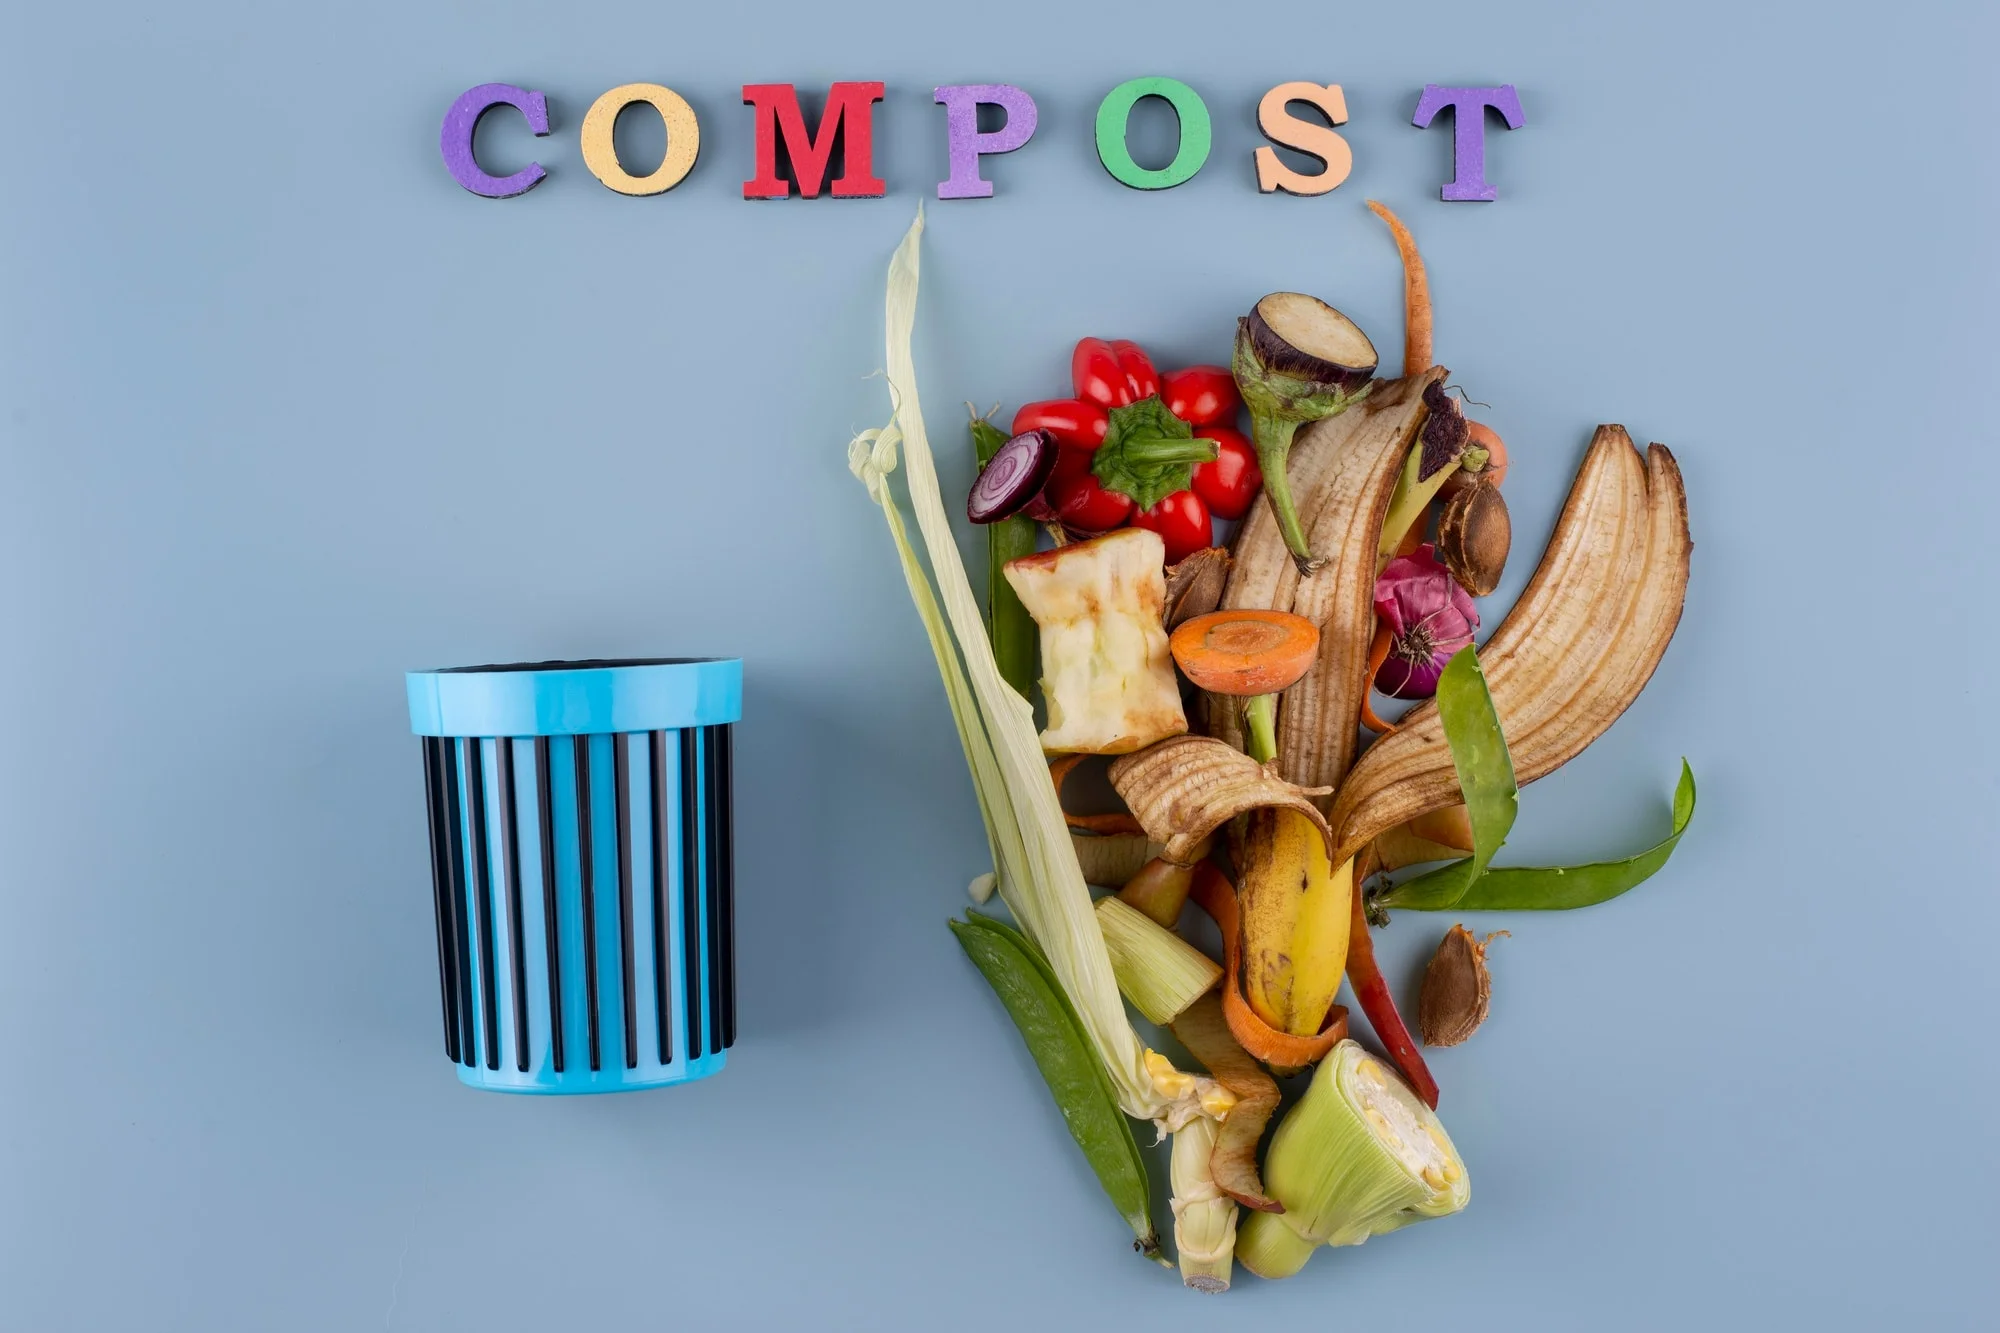 pile of compostable green waste for recycling